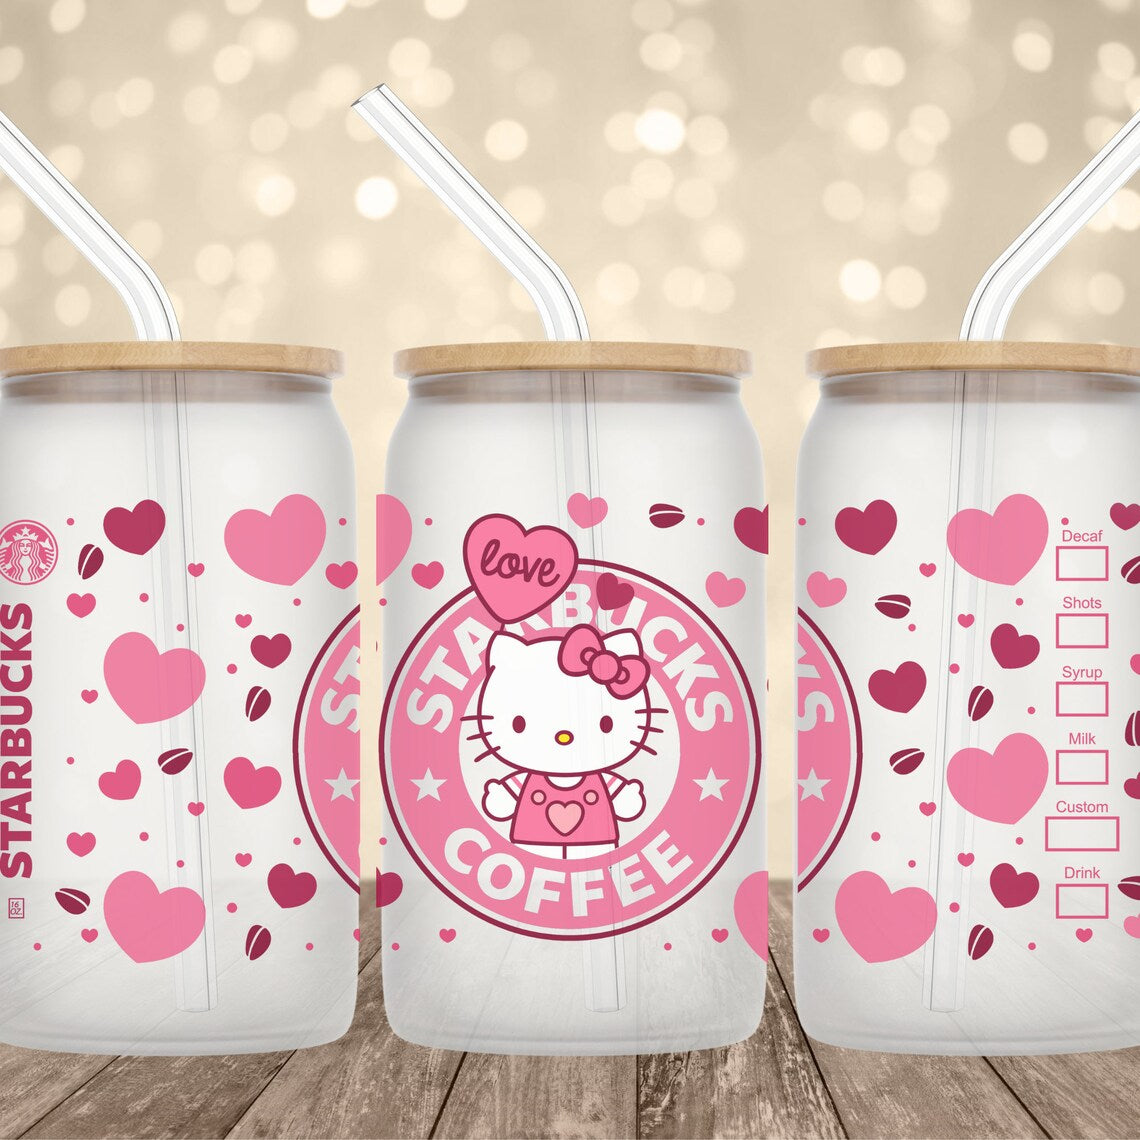 1 Custom 16oz GLASS ICED COFFEE CUP HELLO KITTY WINK VINYL with LID & STRAW